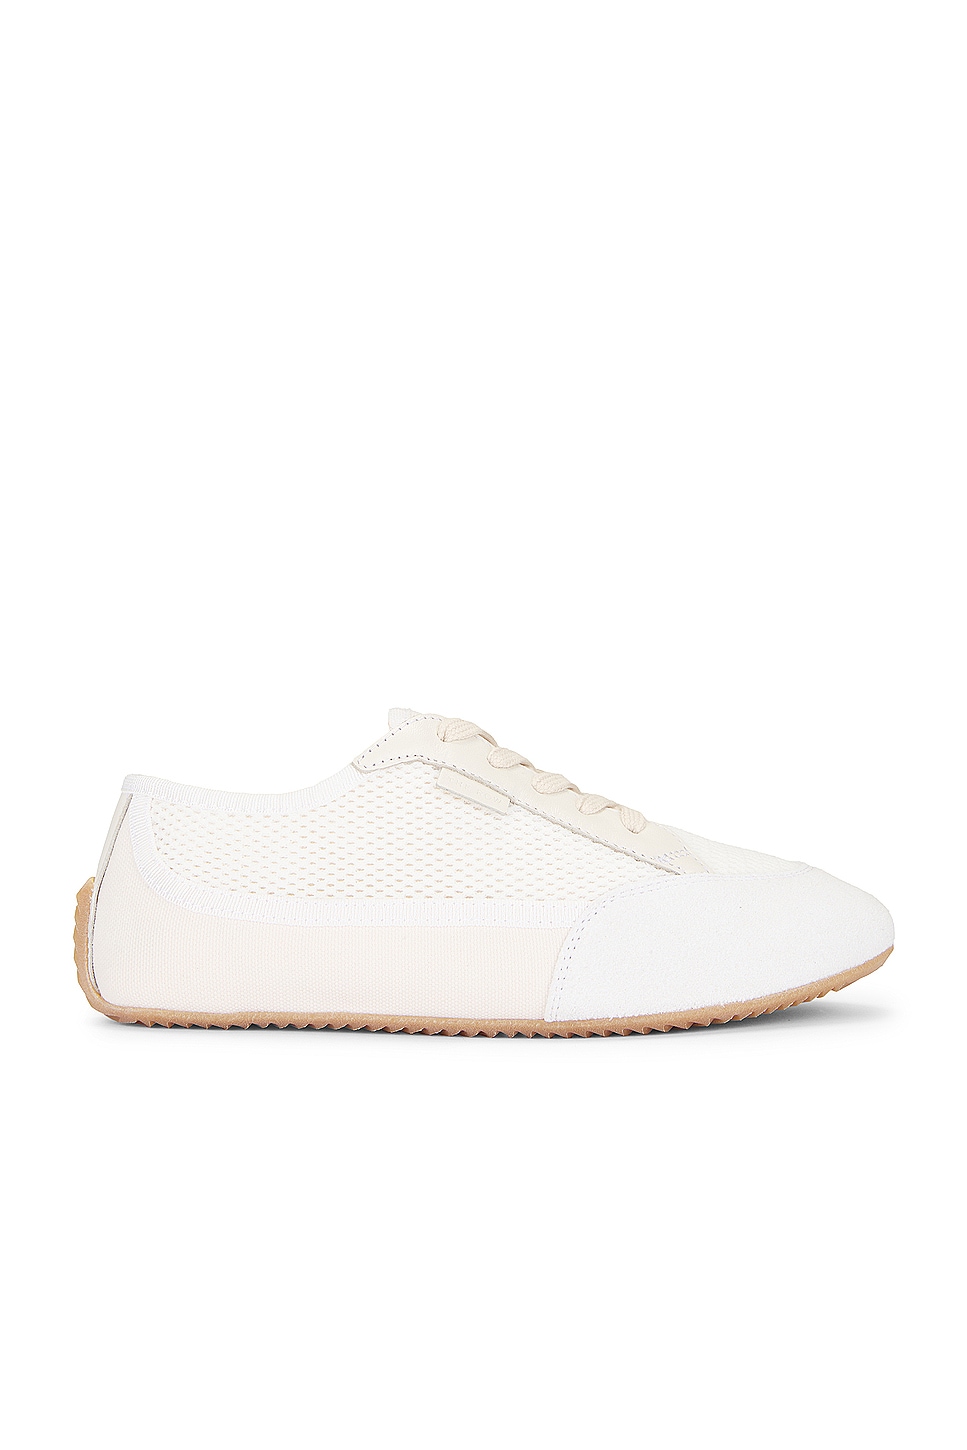 Image 1 of The Row Bonnie Sneaker in Ivory & White